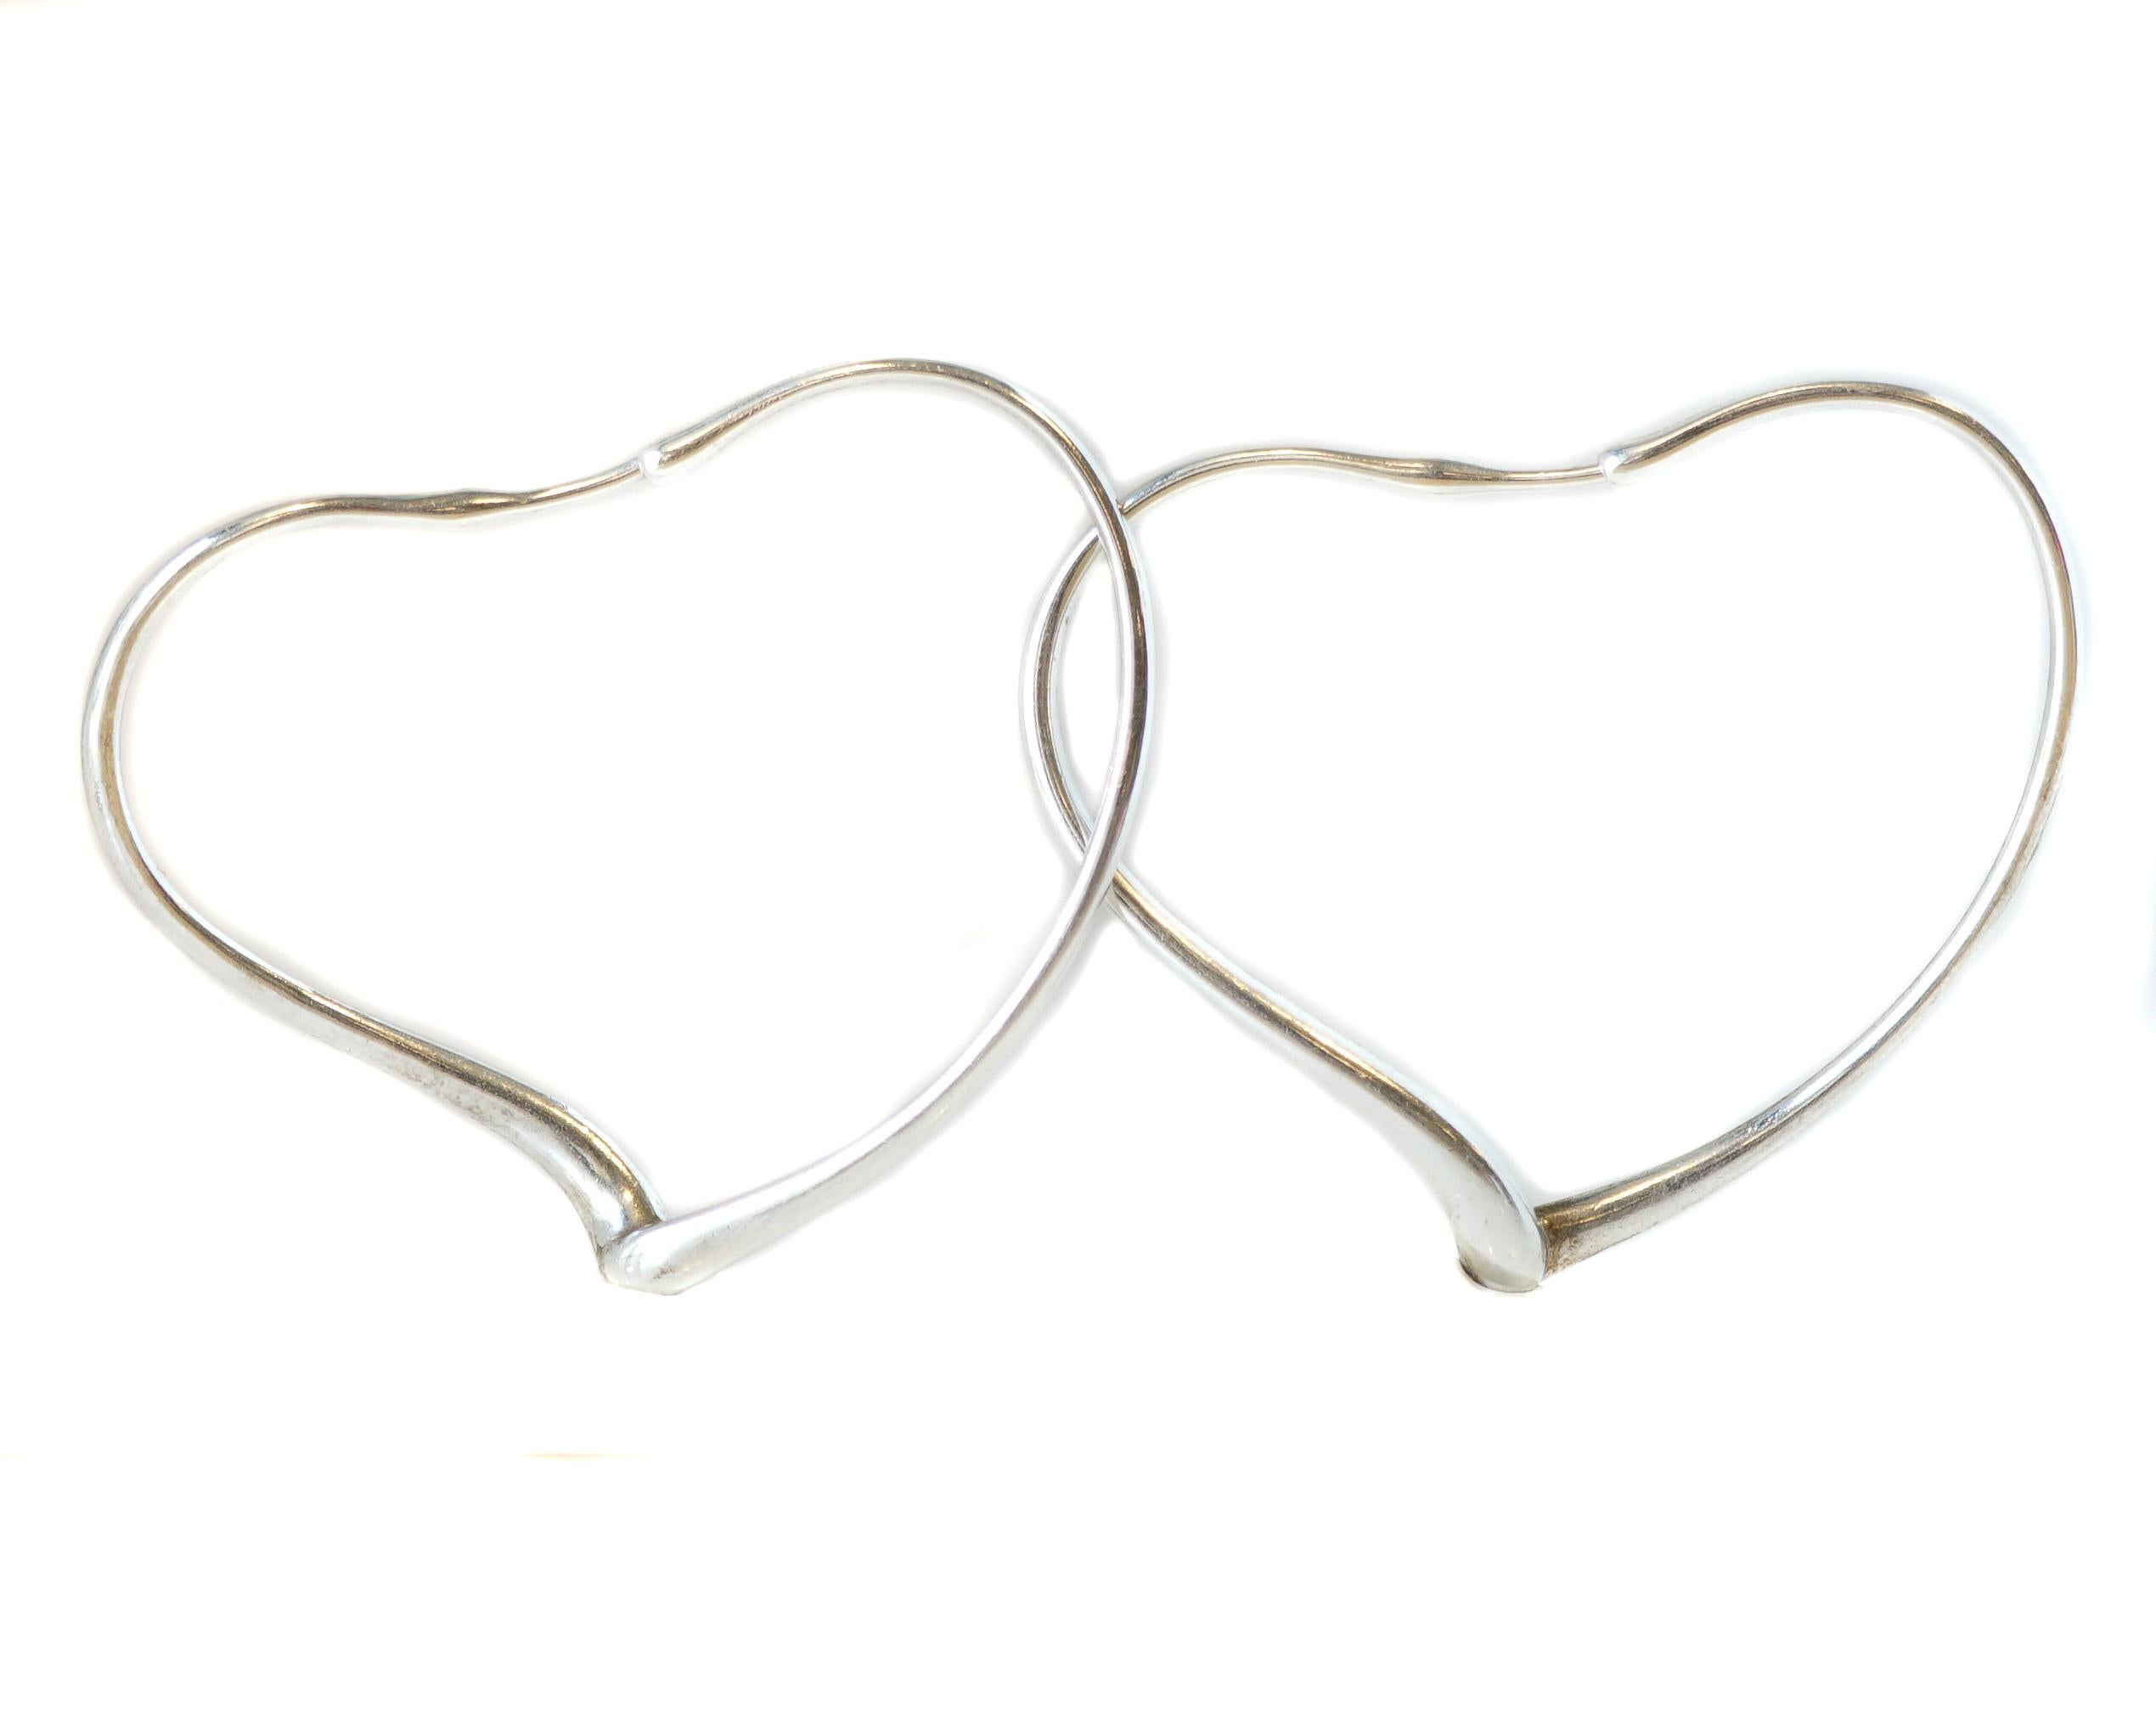 Elsa Peretti for Tiffany and Co. Open Heart Hoop Earrings - Sterling Silver

Features
High polish Sterling Silver
Fluid Heart Shape
5 centimeters wide x 4 centimeters high
Designed by Elsa Peretti for Tiffany and Co.

Earring Details:
Metal: